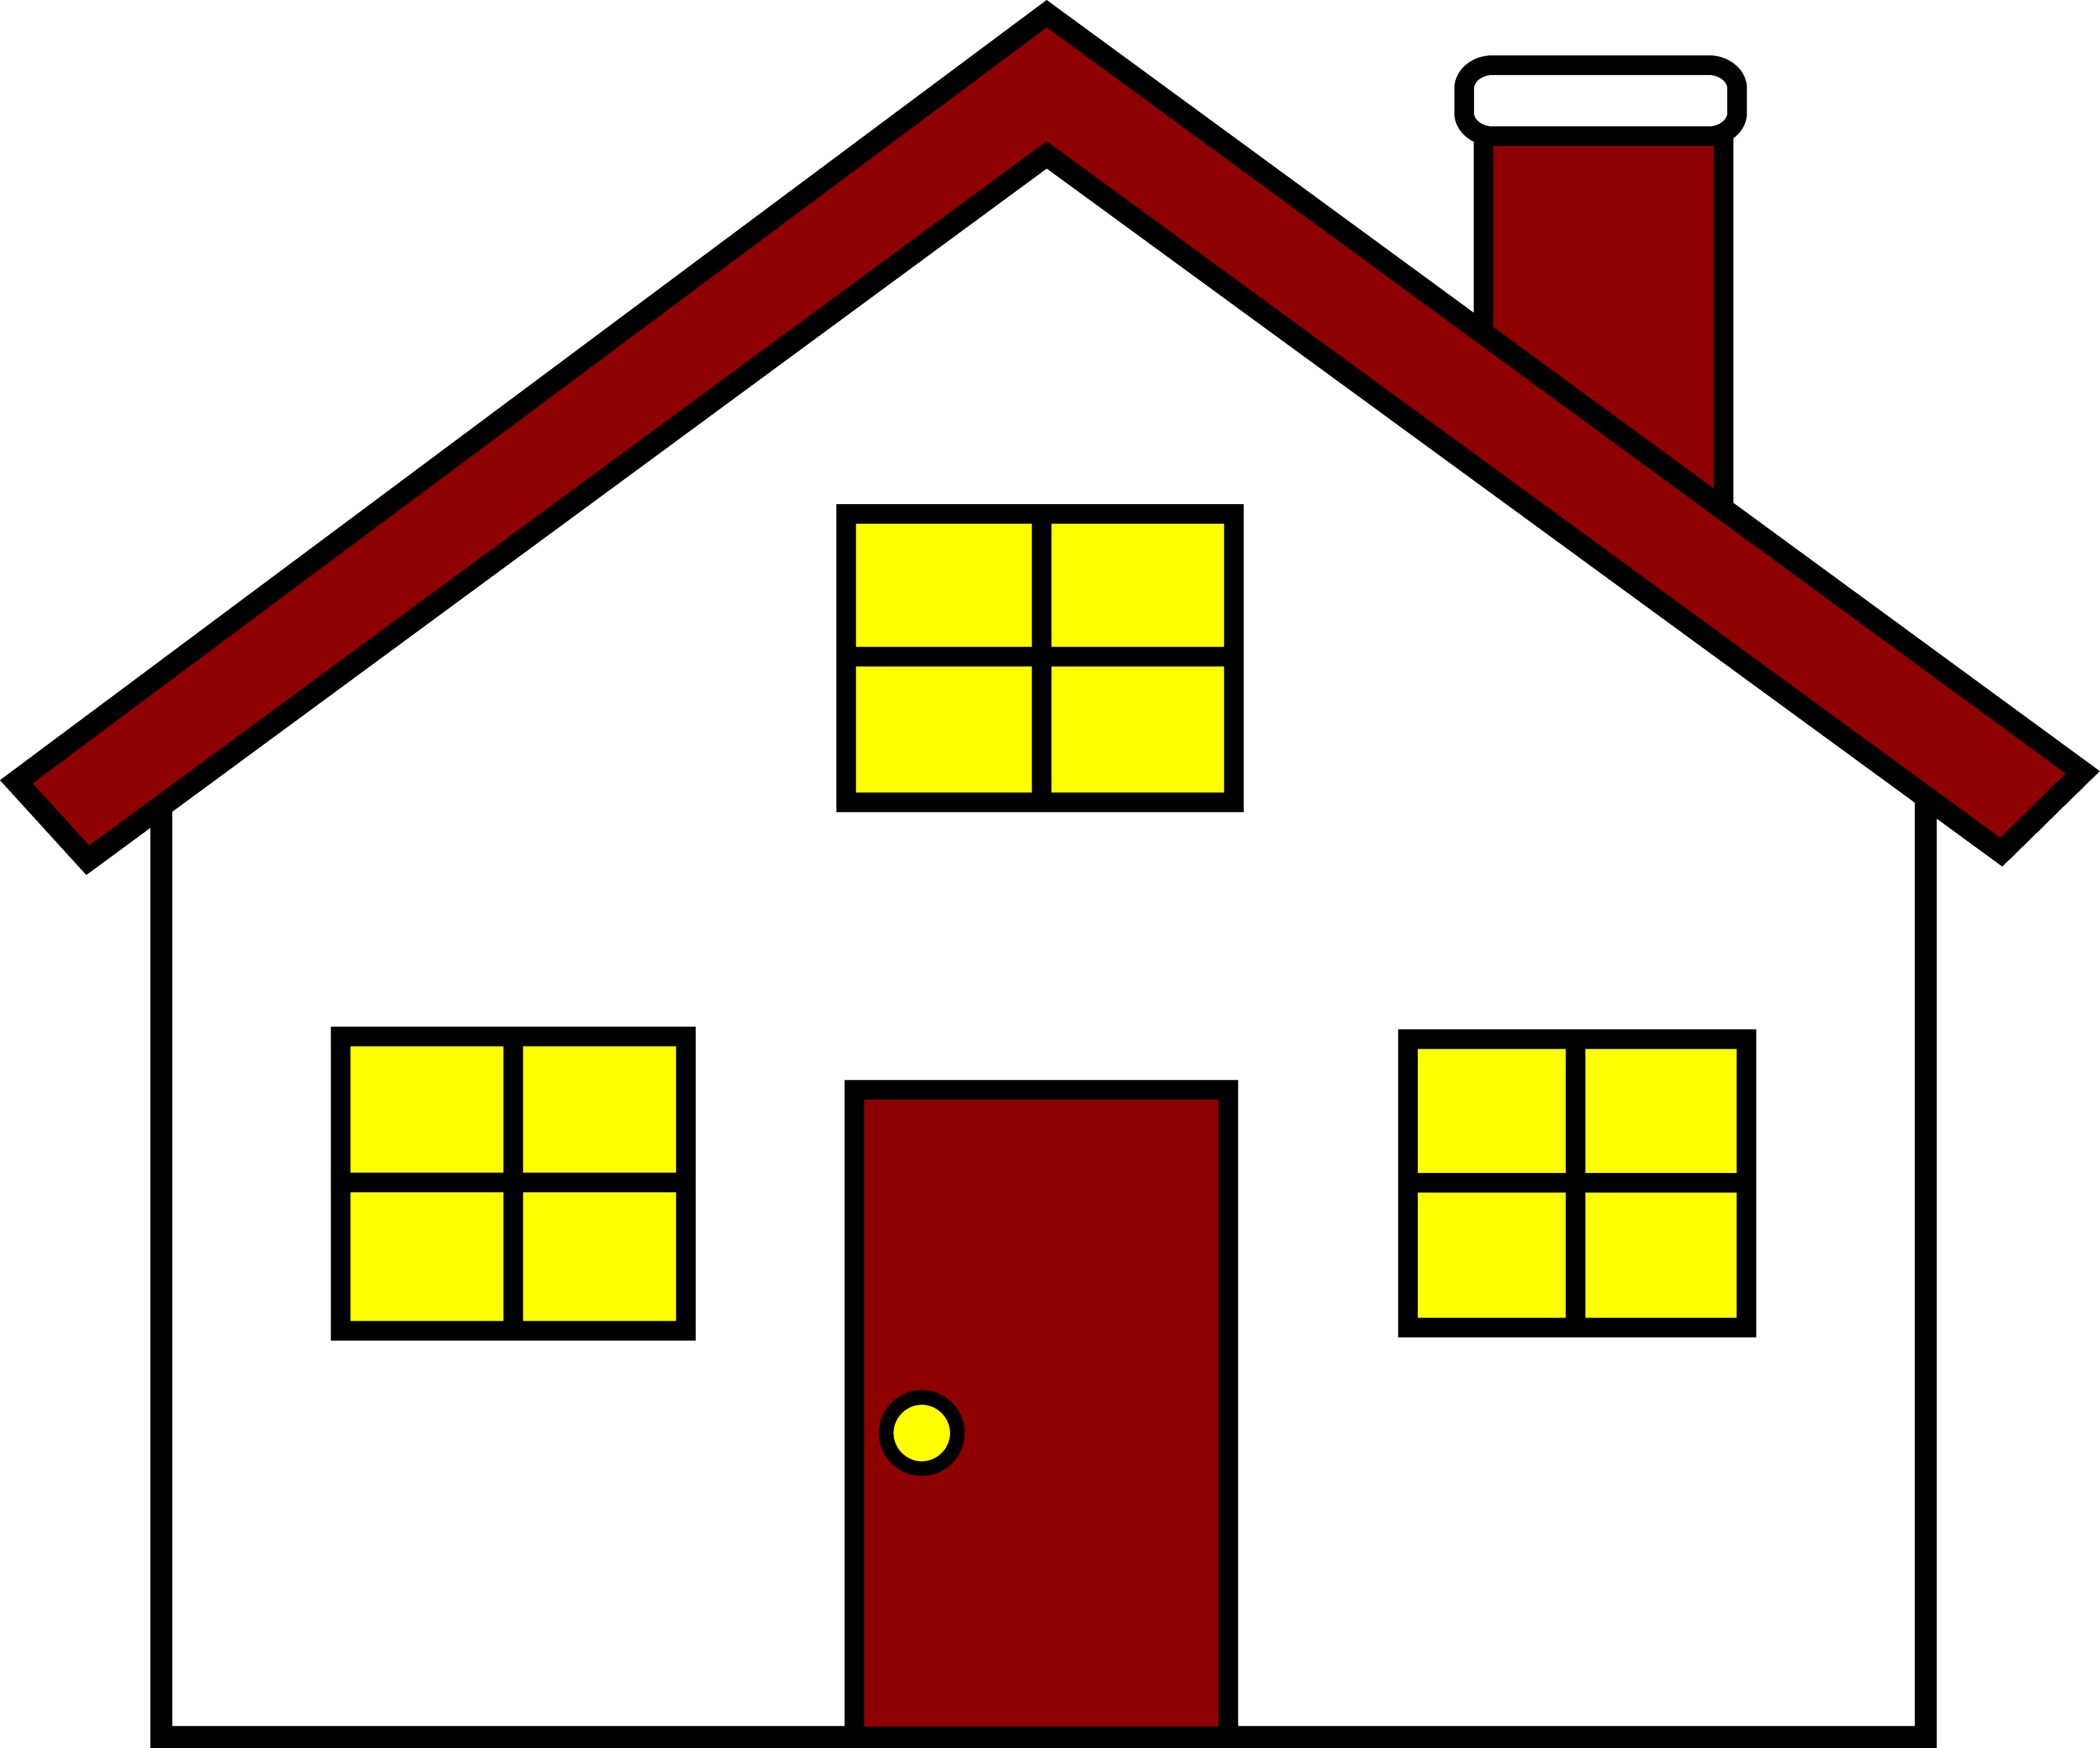 Clipart Houses Apartments | Clipart Panda - Free Clipart Images